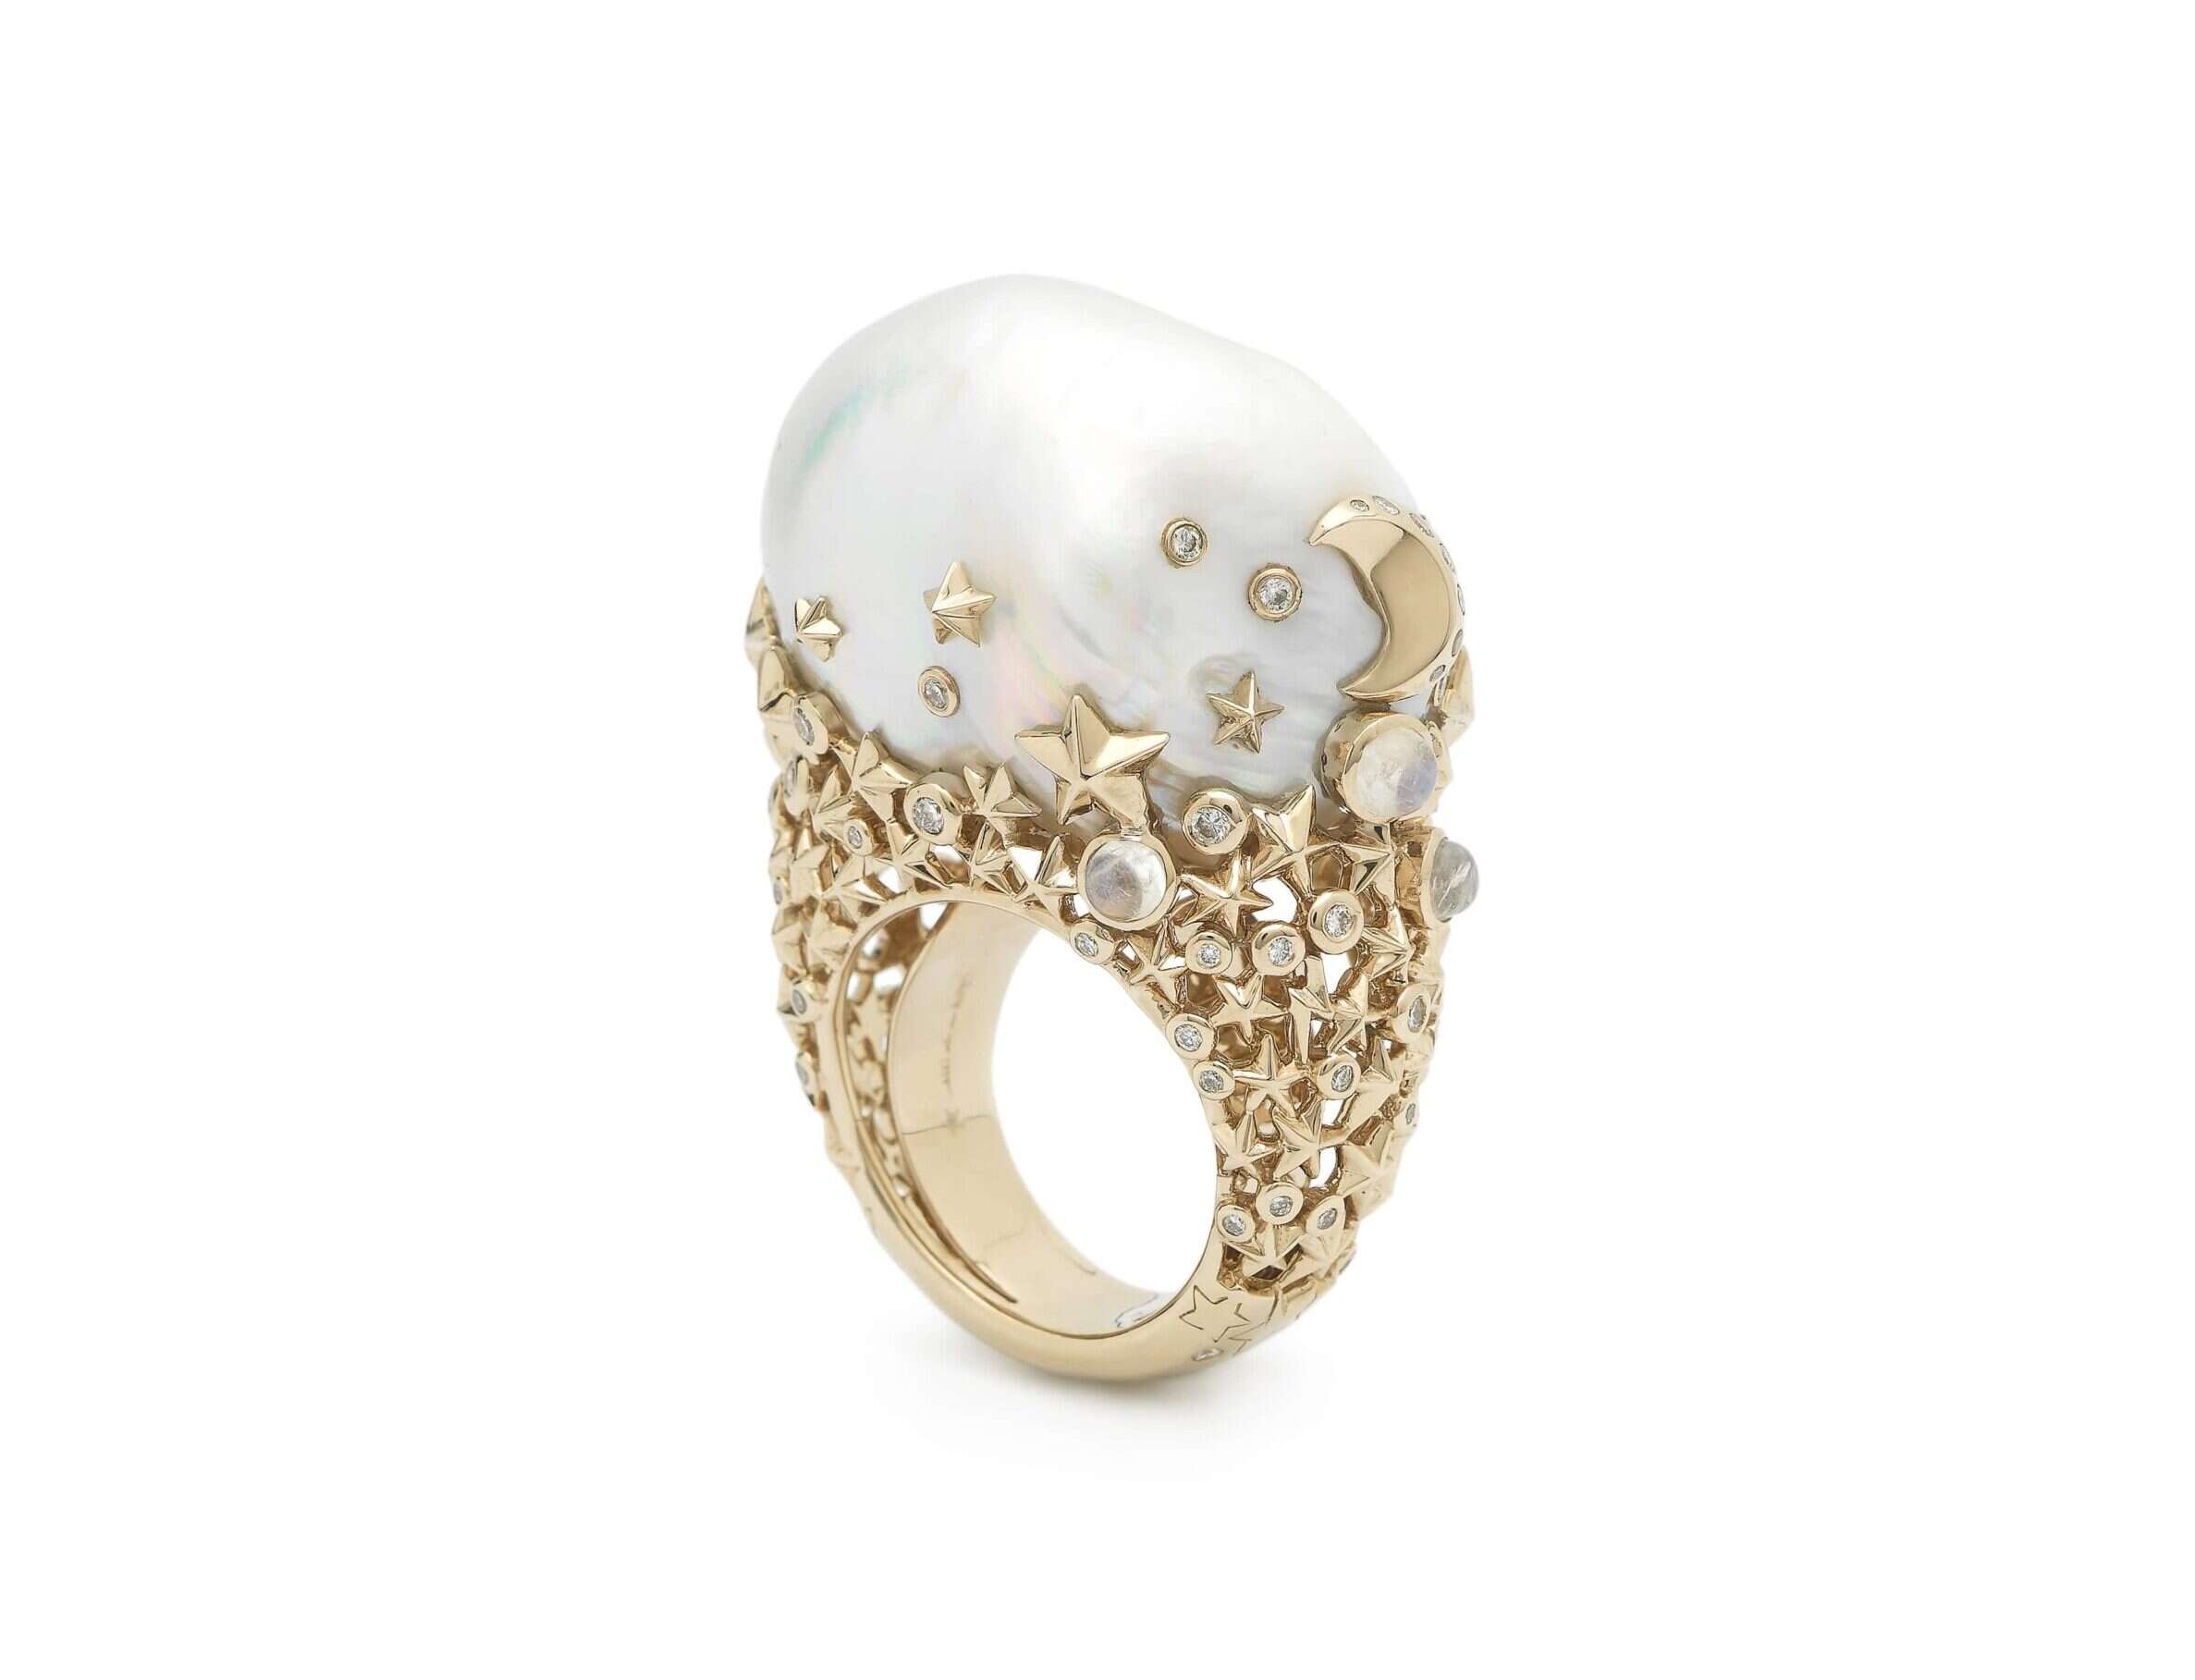 Contemporary Pearl Jewelry Reinvented for the Modern Day